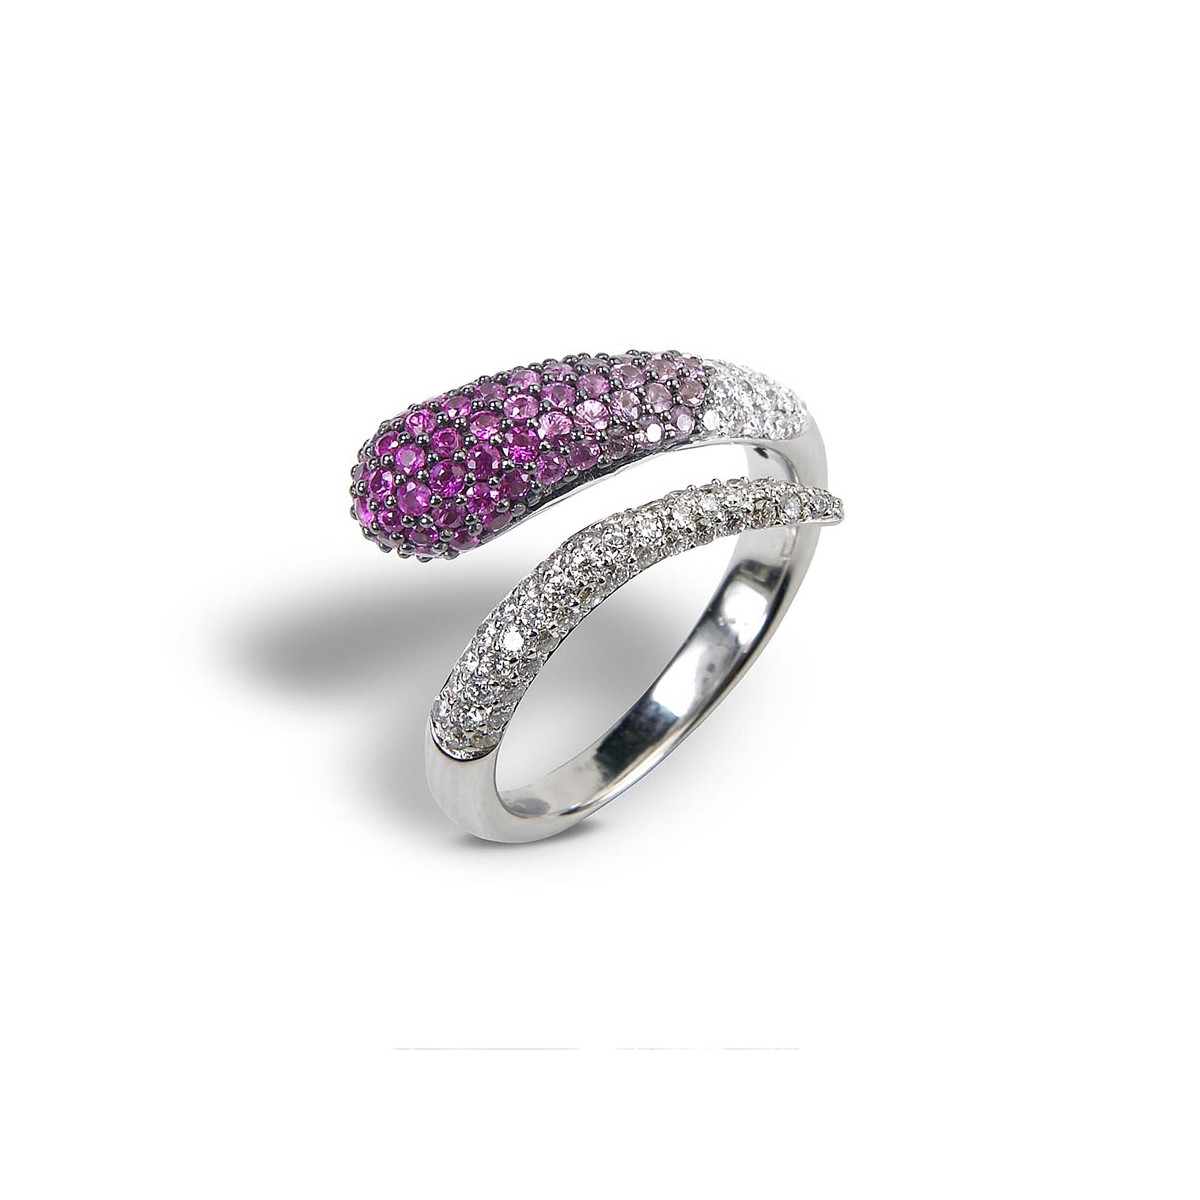 RING WITH PINK SAPPHIRES